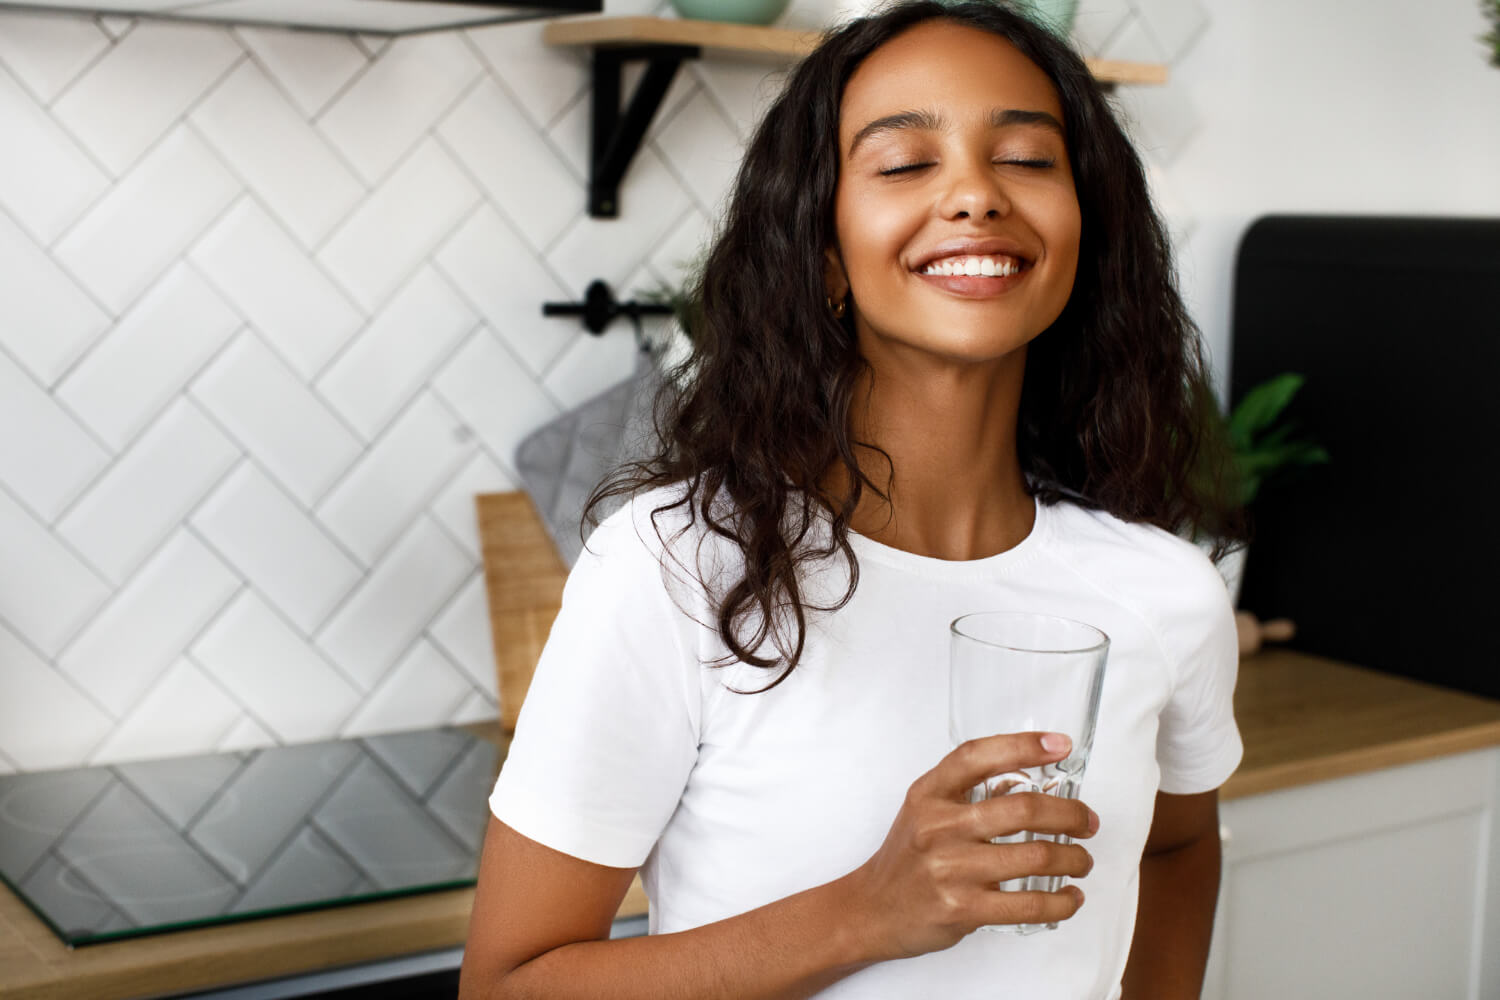 A lady smiling and holding a glass of water in her hand